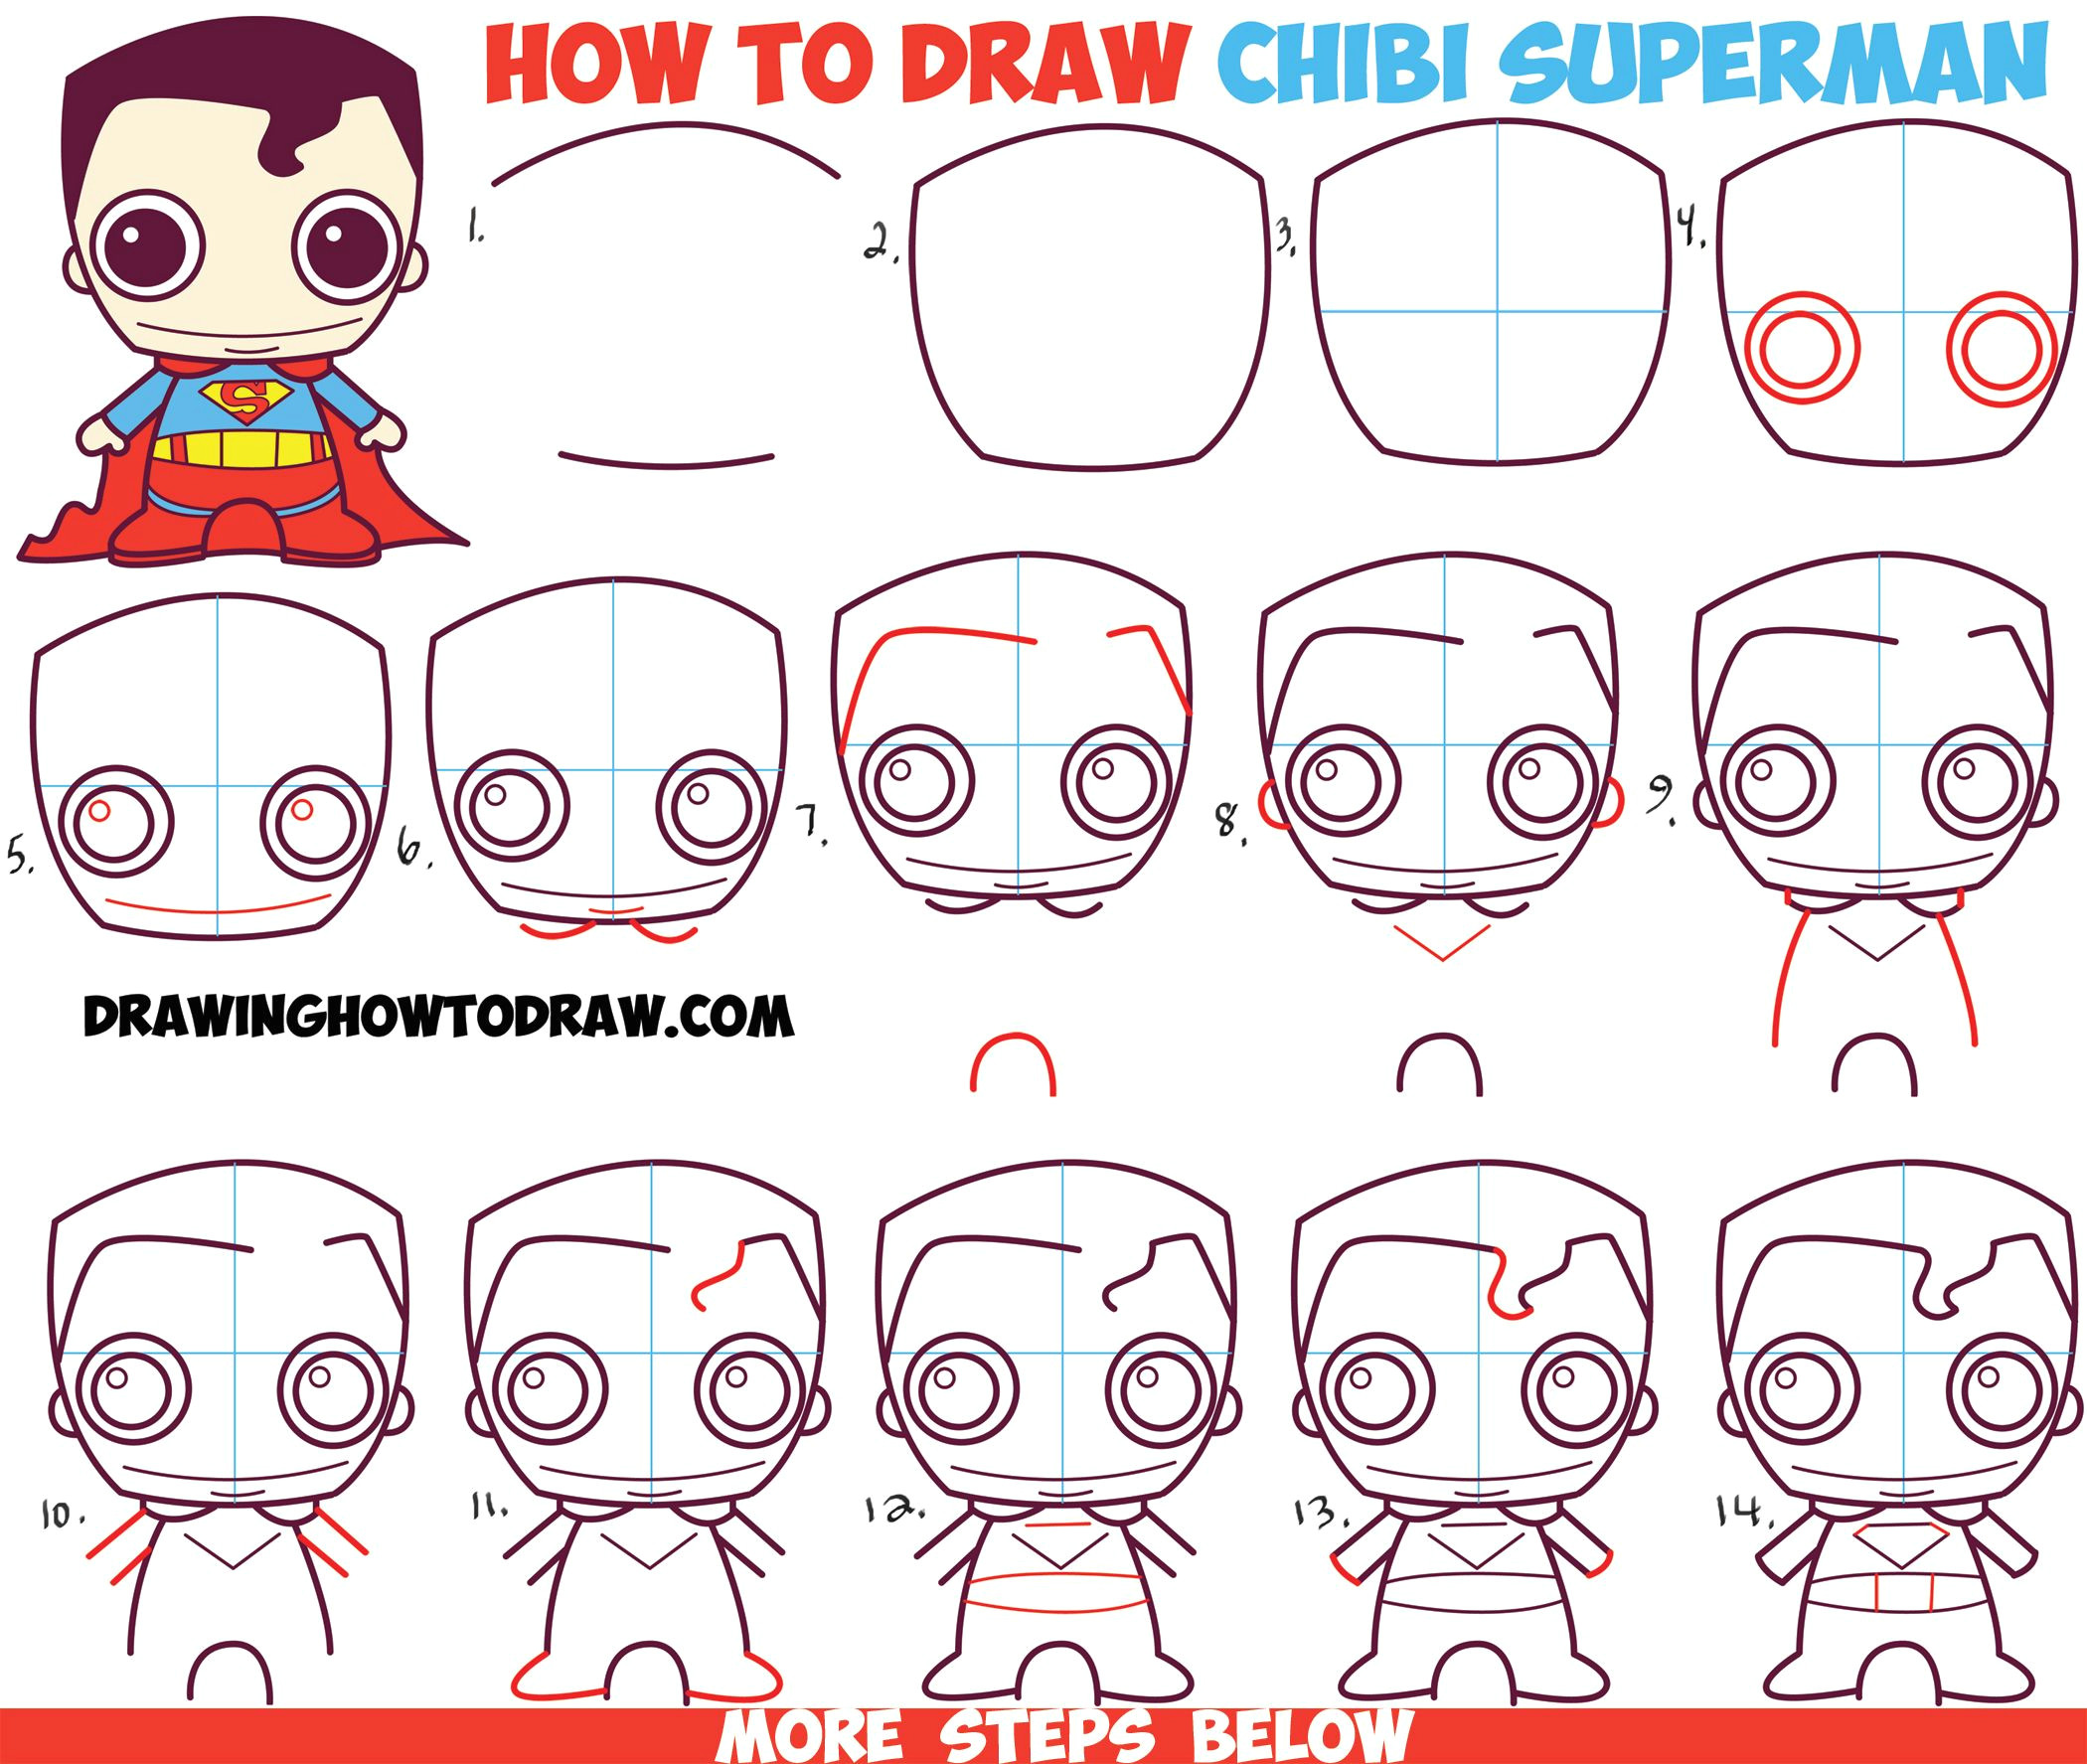 Easy Drawings for 12 Year Olds Step by Step How to Draw Cute Chibi Superman From Dc Comics In Easy Step by Step